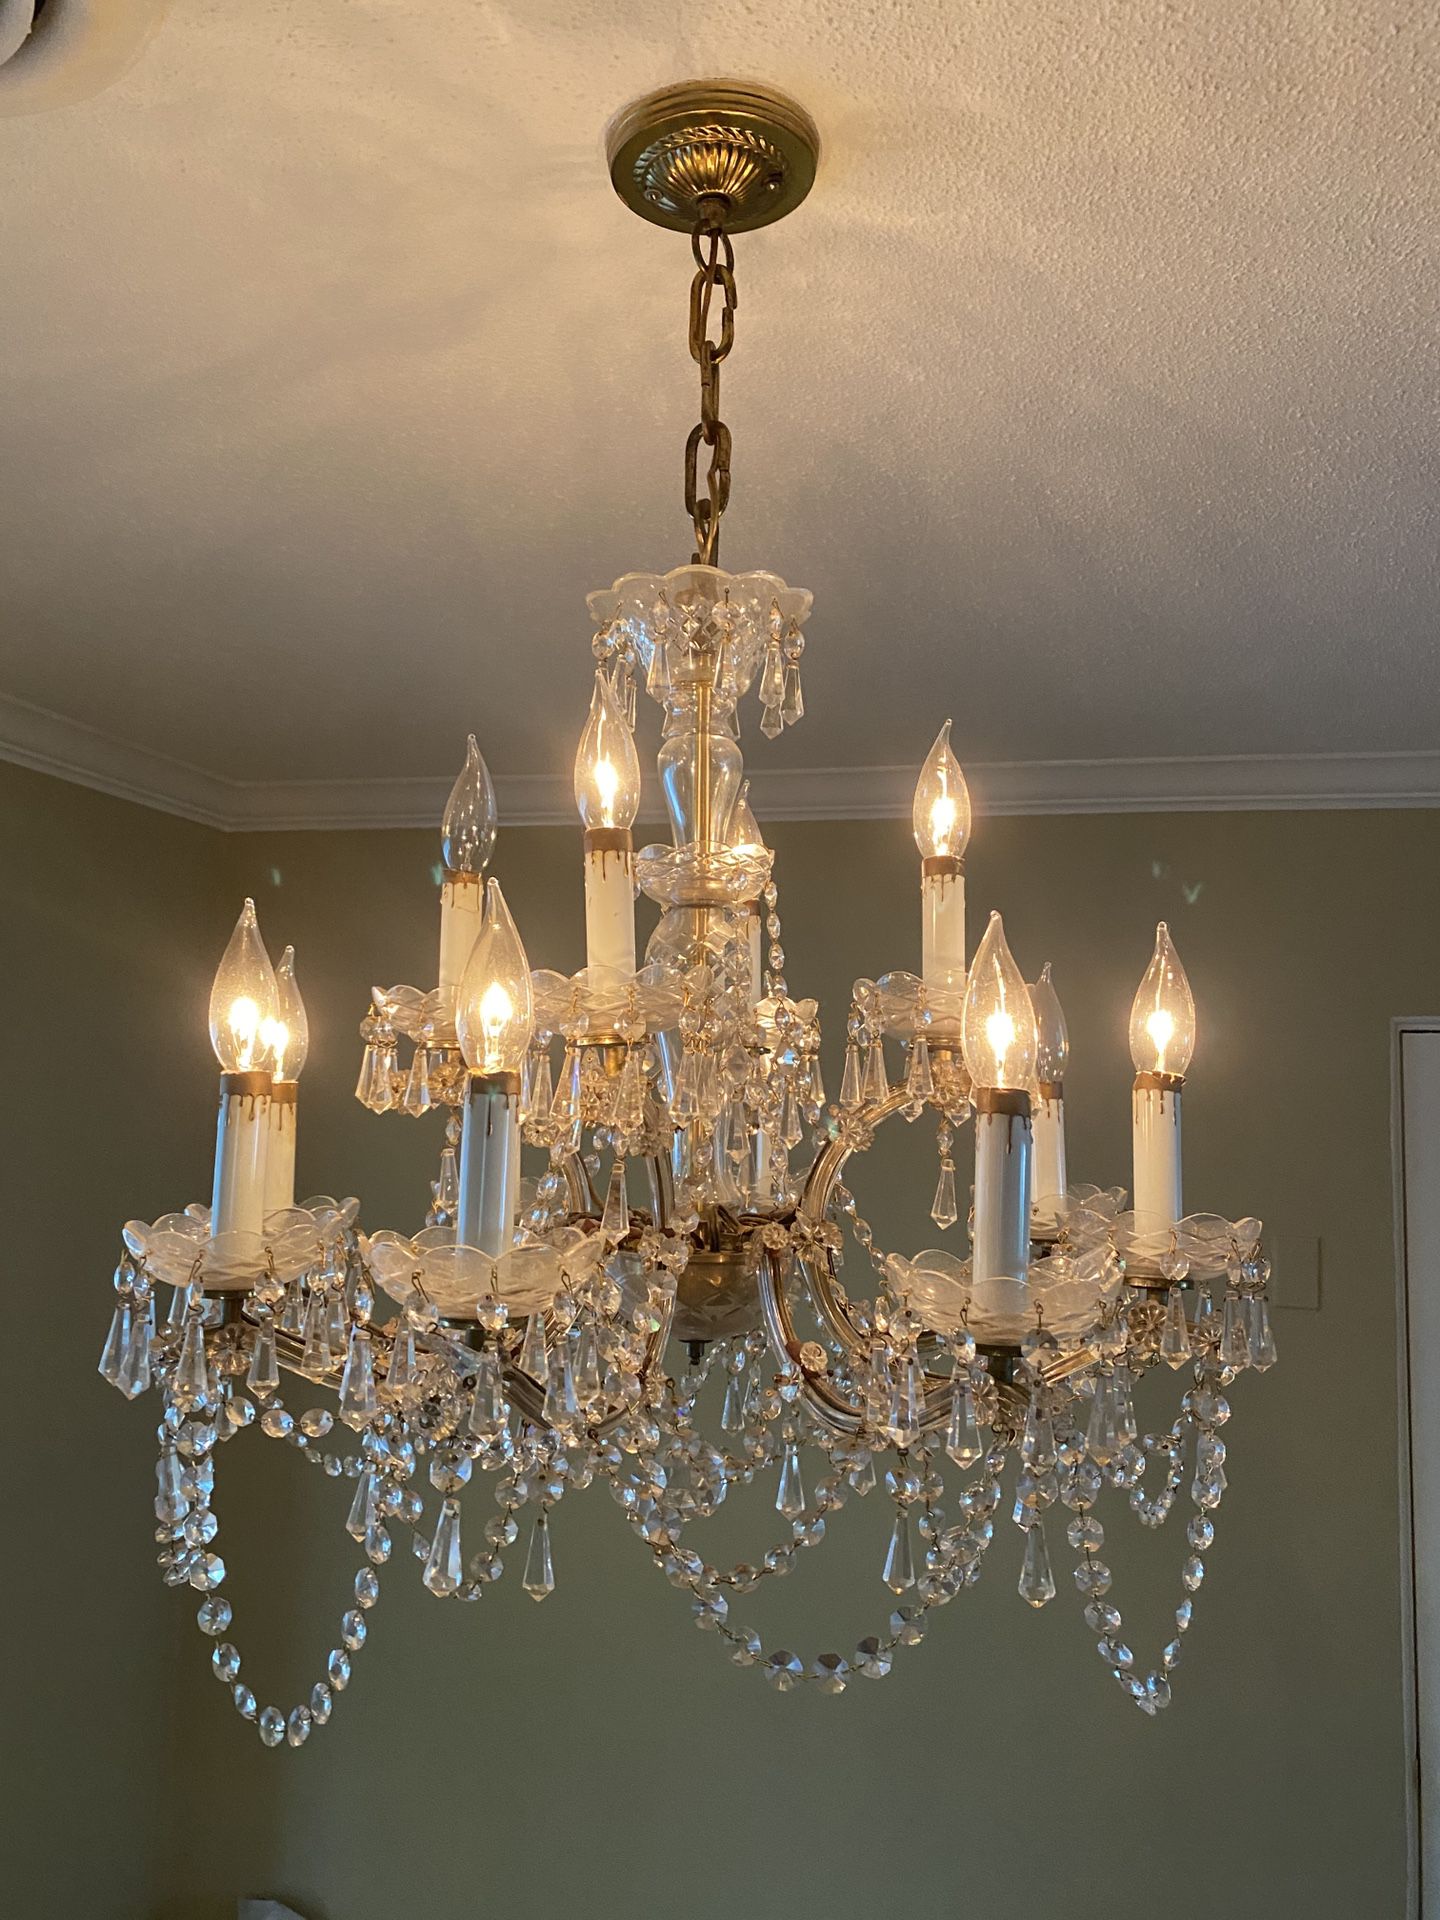 FREE chandelier - must be able to disconnect yourself